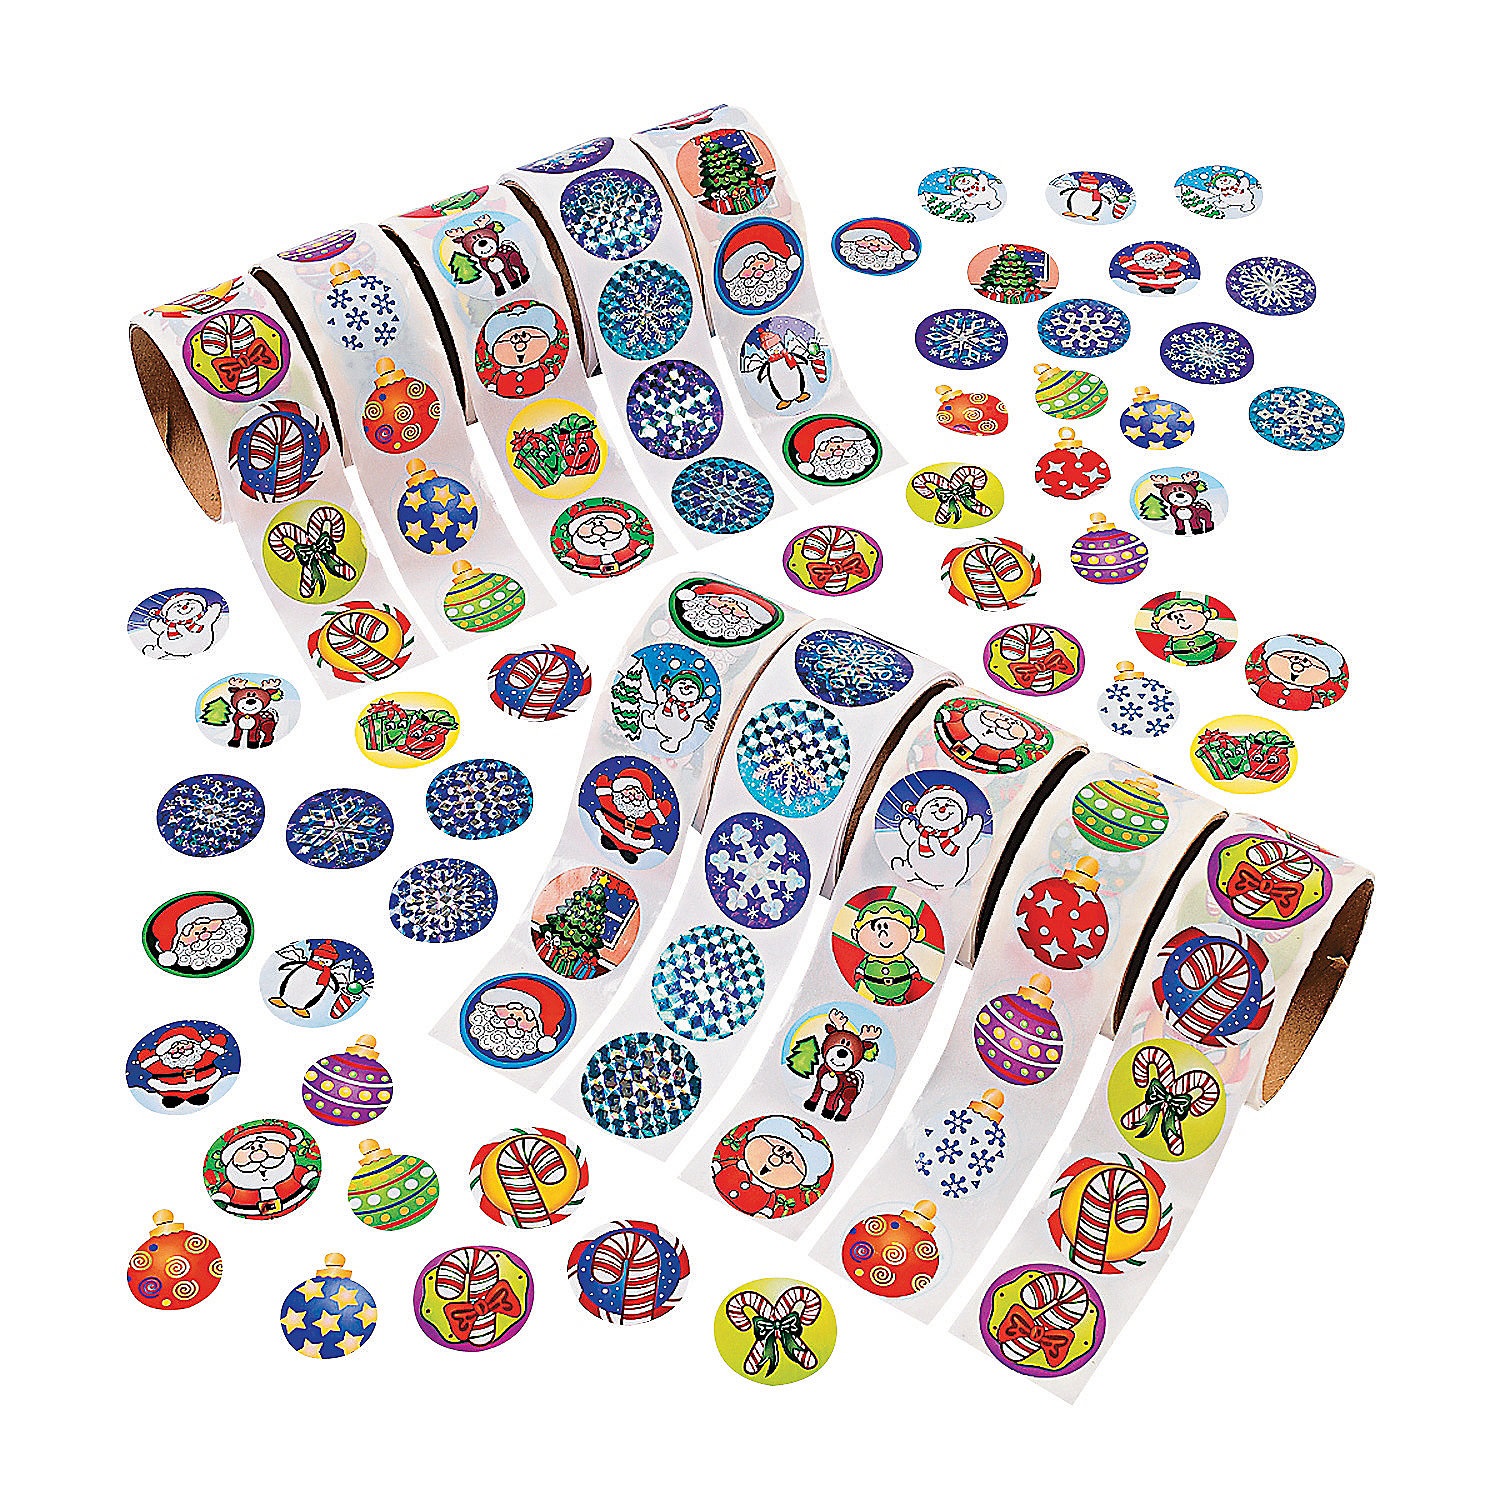 holiday-rolls-of-stickers-assortment-1000-pc-_4_2553b